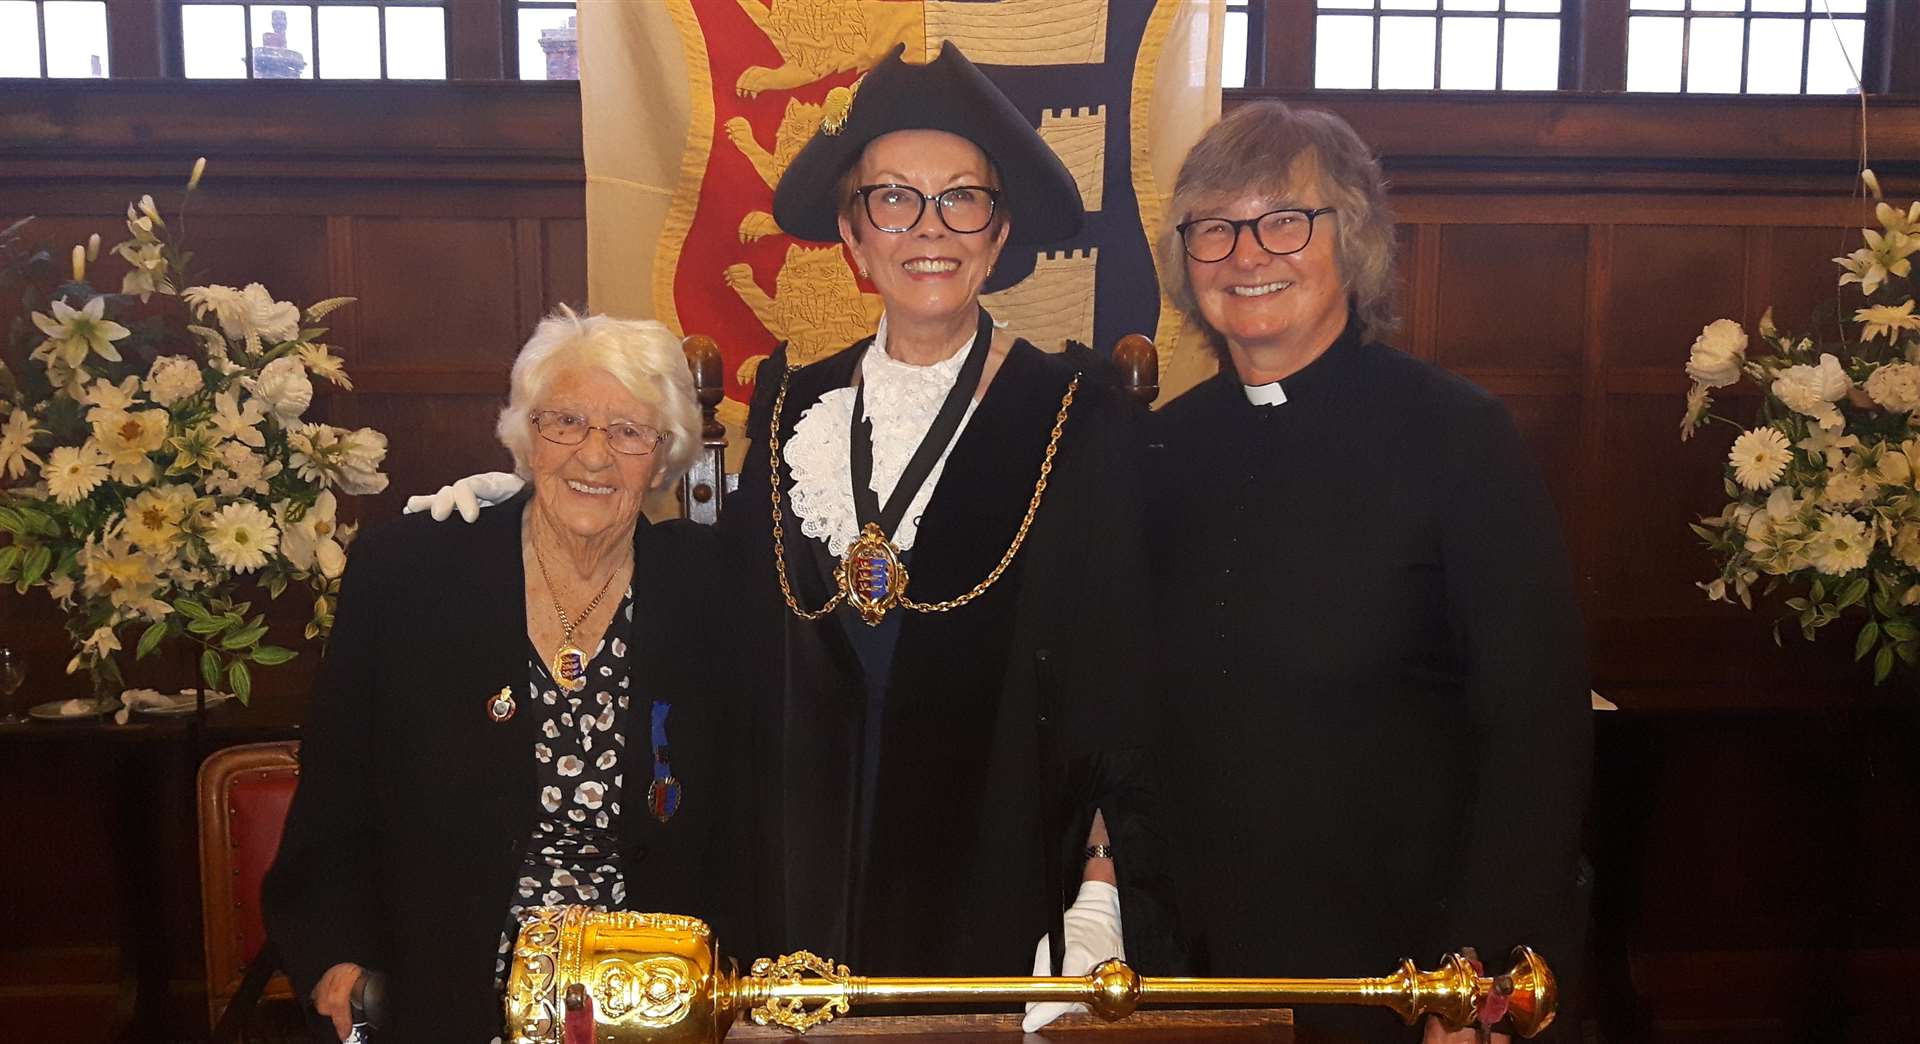 The last female mayor Mary Laslett with the new Mayor Cllr Veronica Liote and chaplain Jean Males